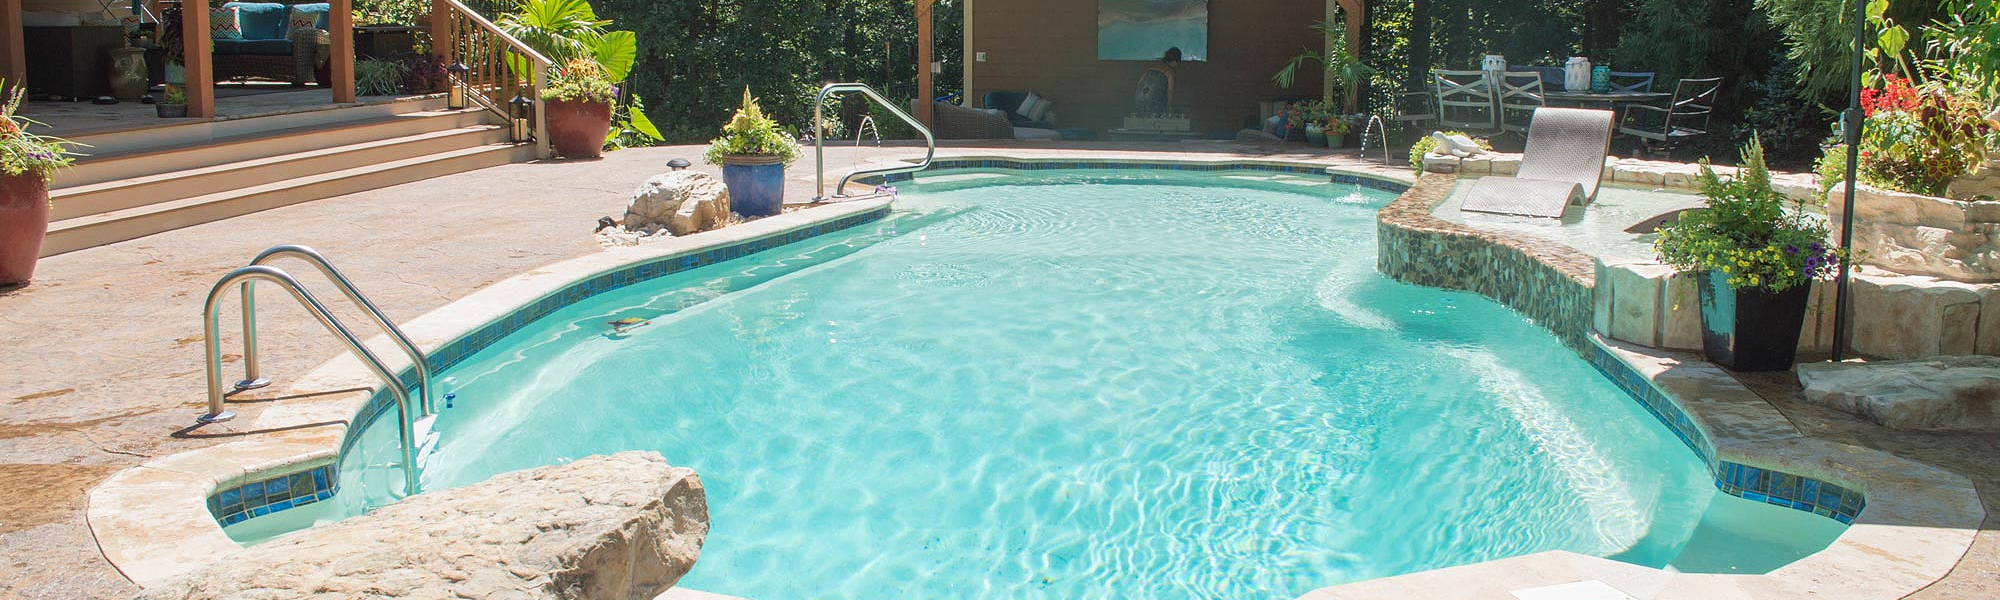 Inground Swimming Pools, Cost Of Inground Pools In Raleigh Nc